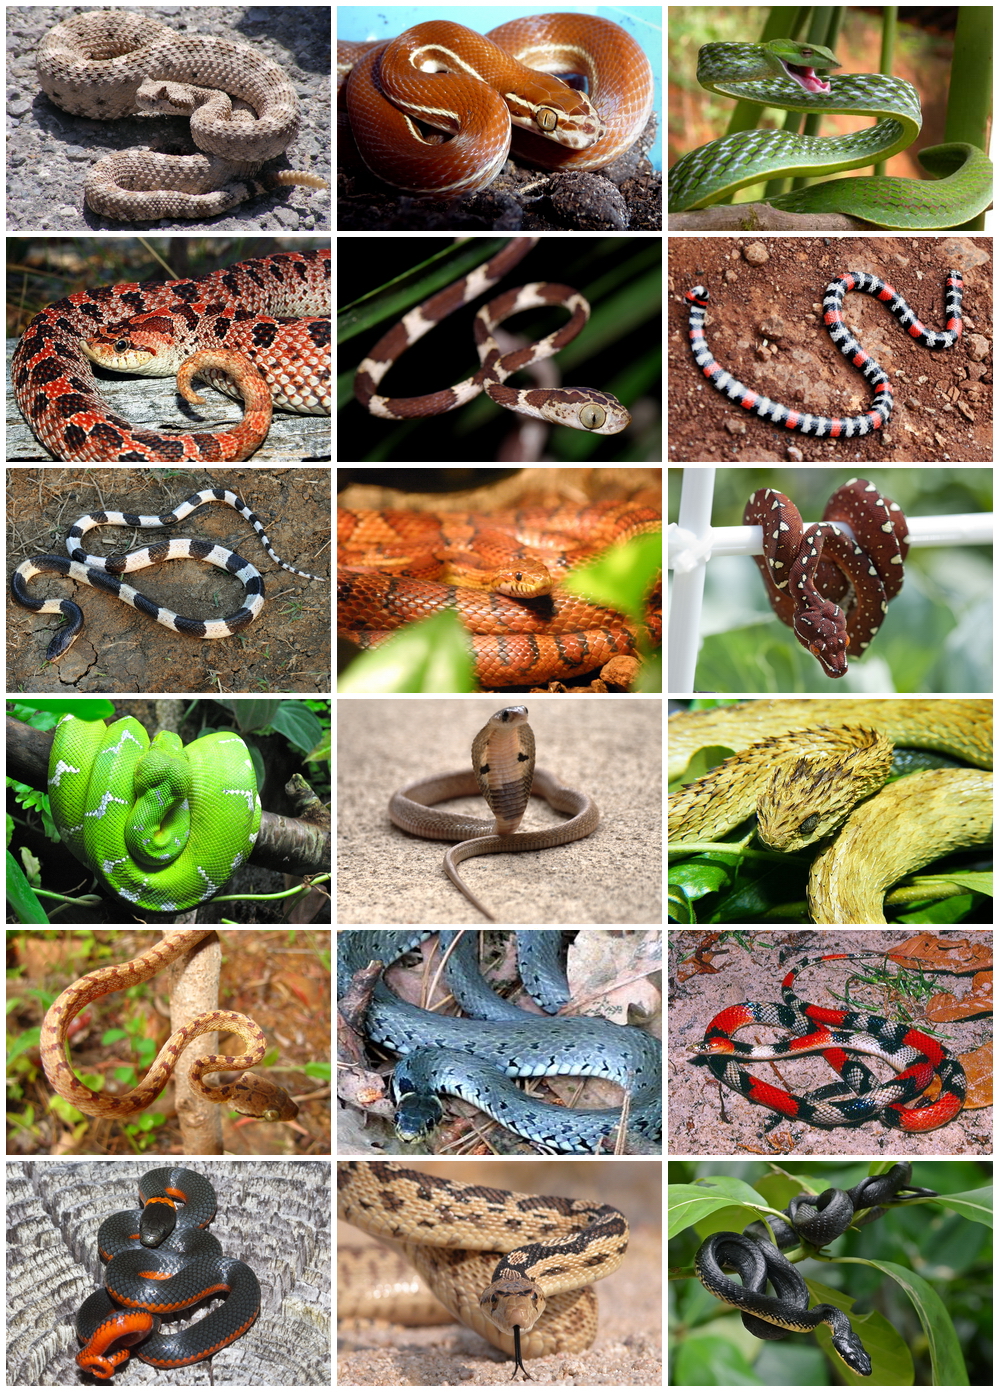 How many species of snakes are there?